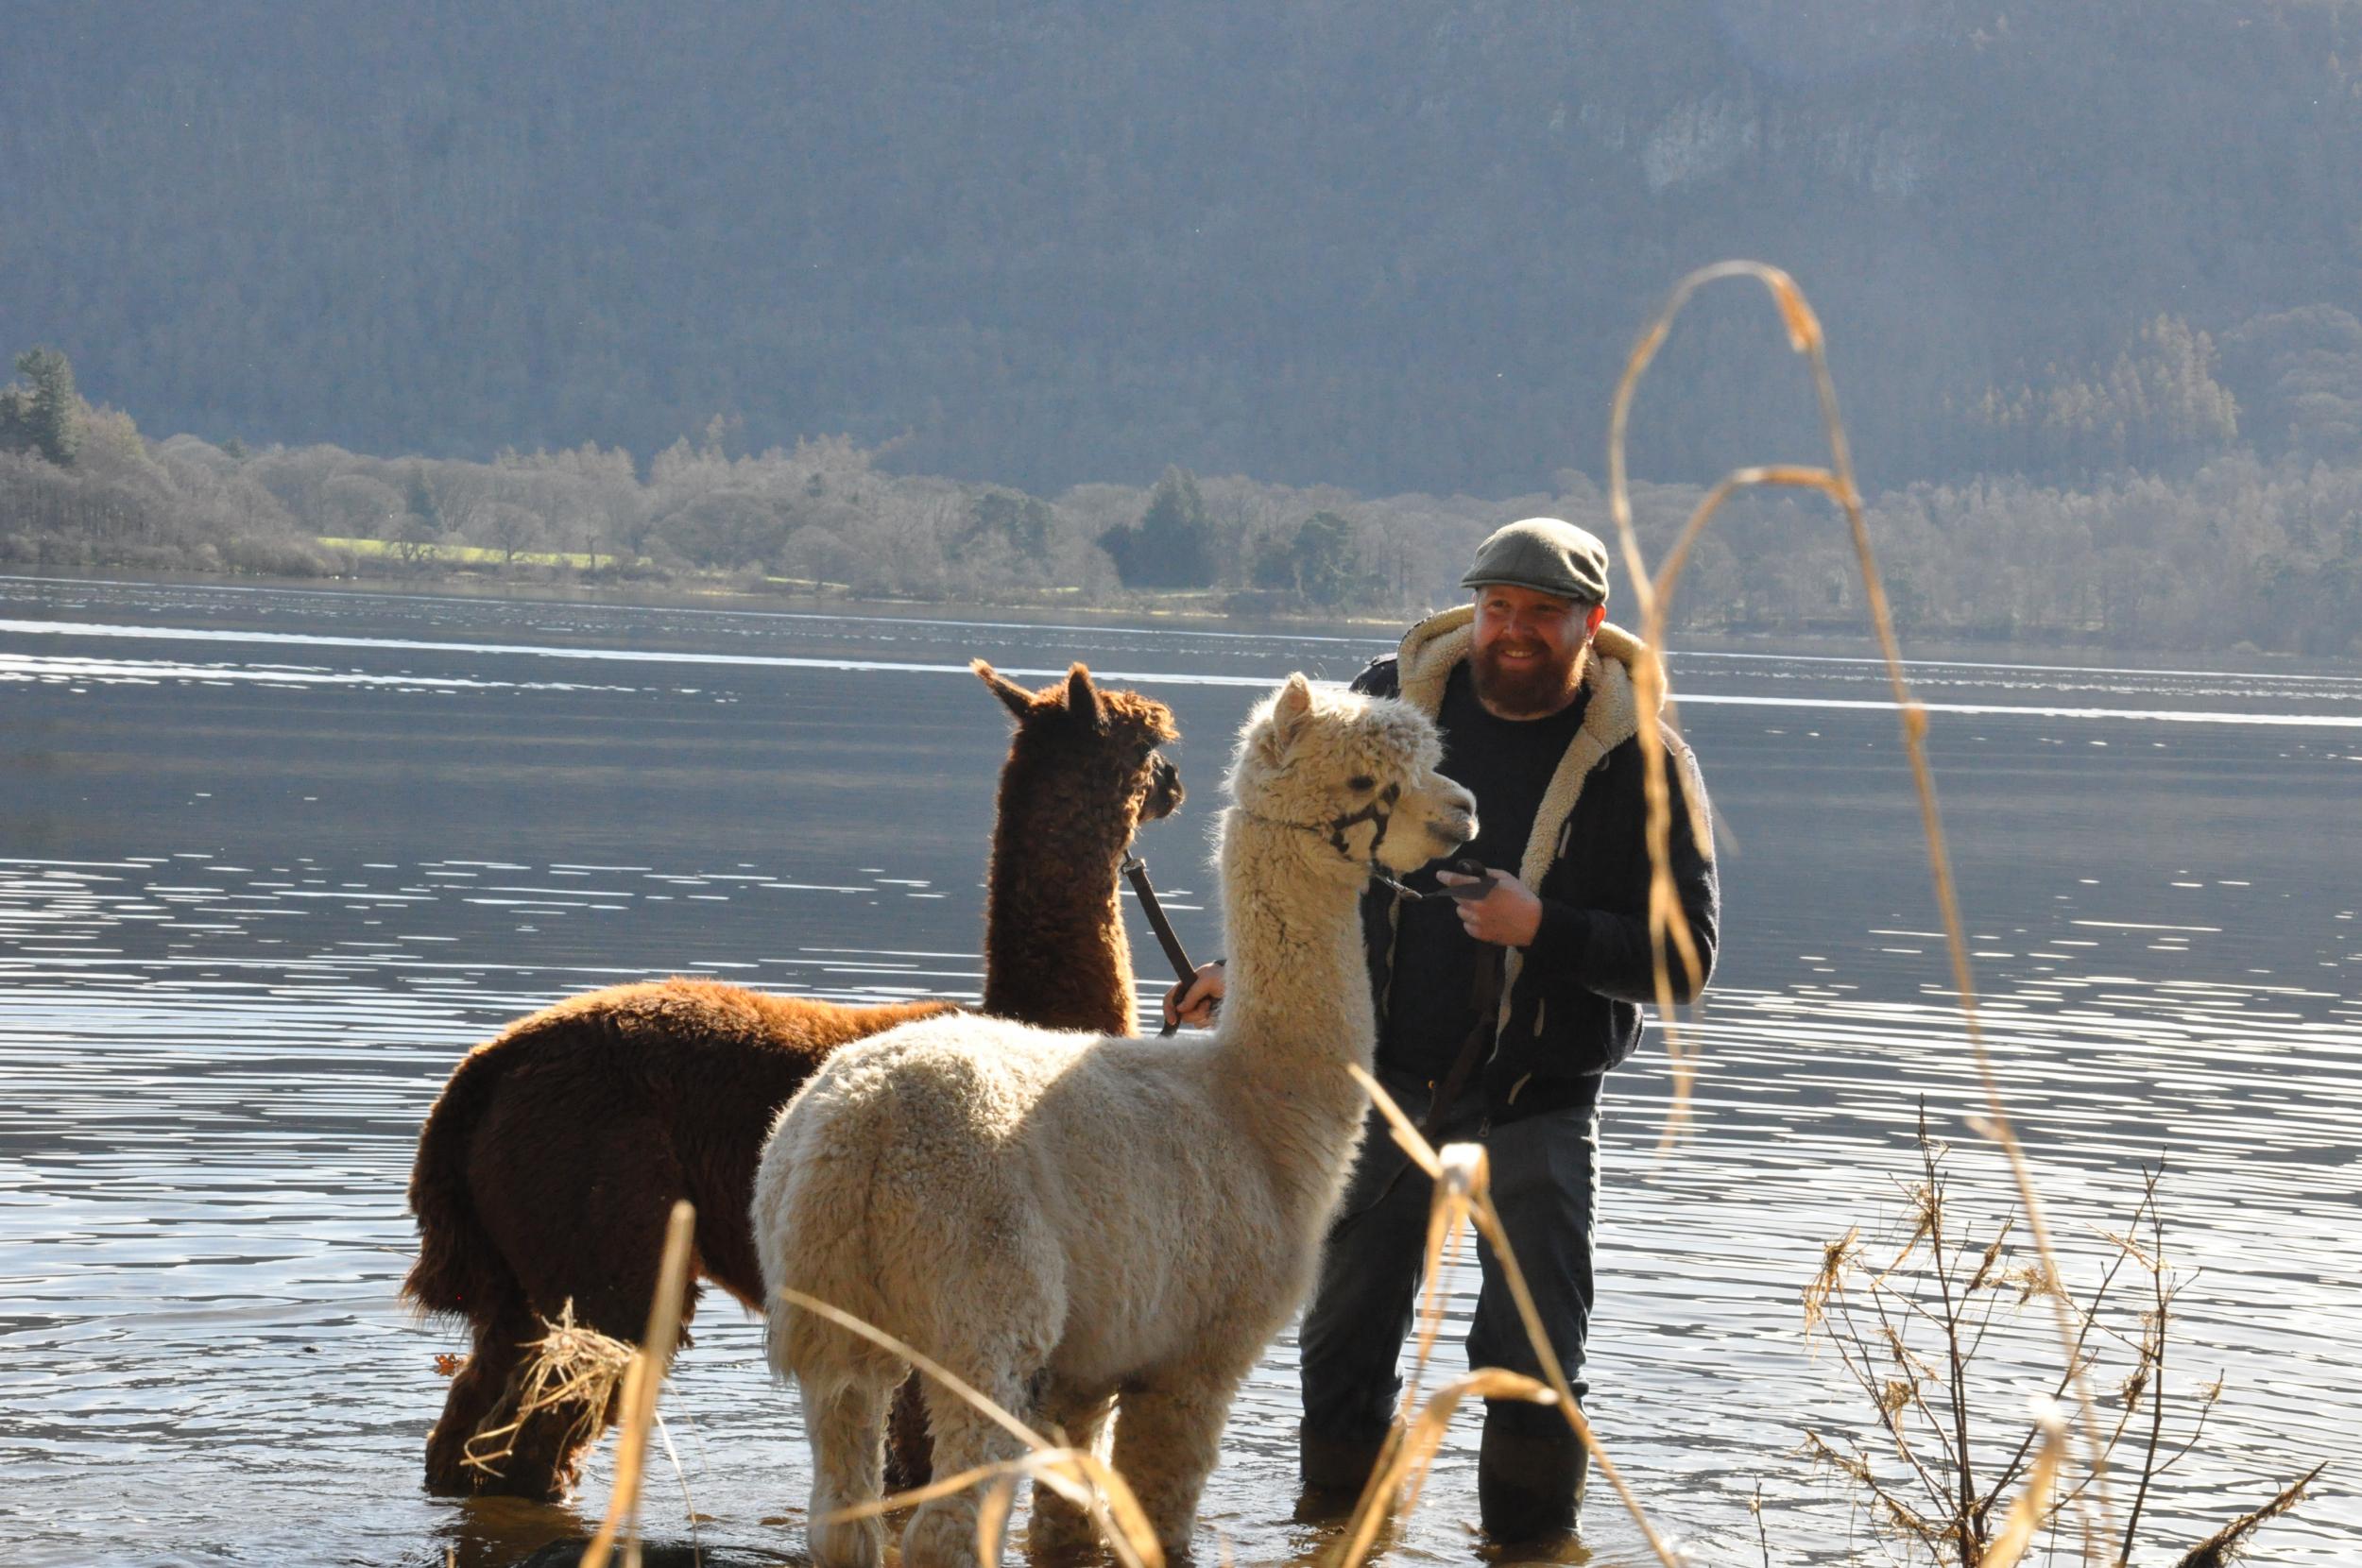 Terry takes the alpacas for a dip